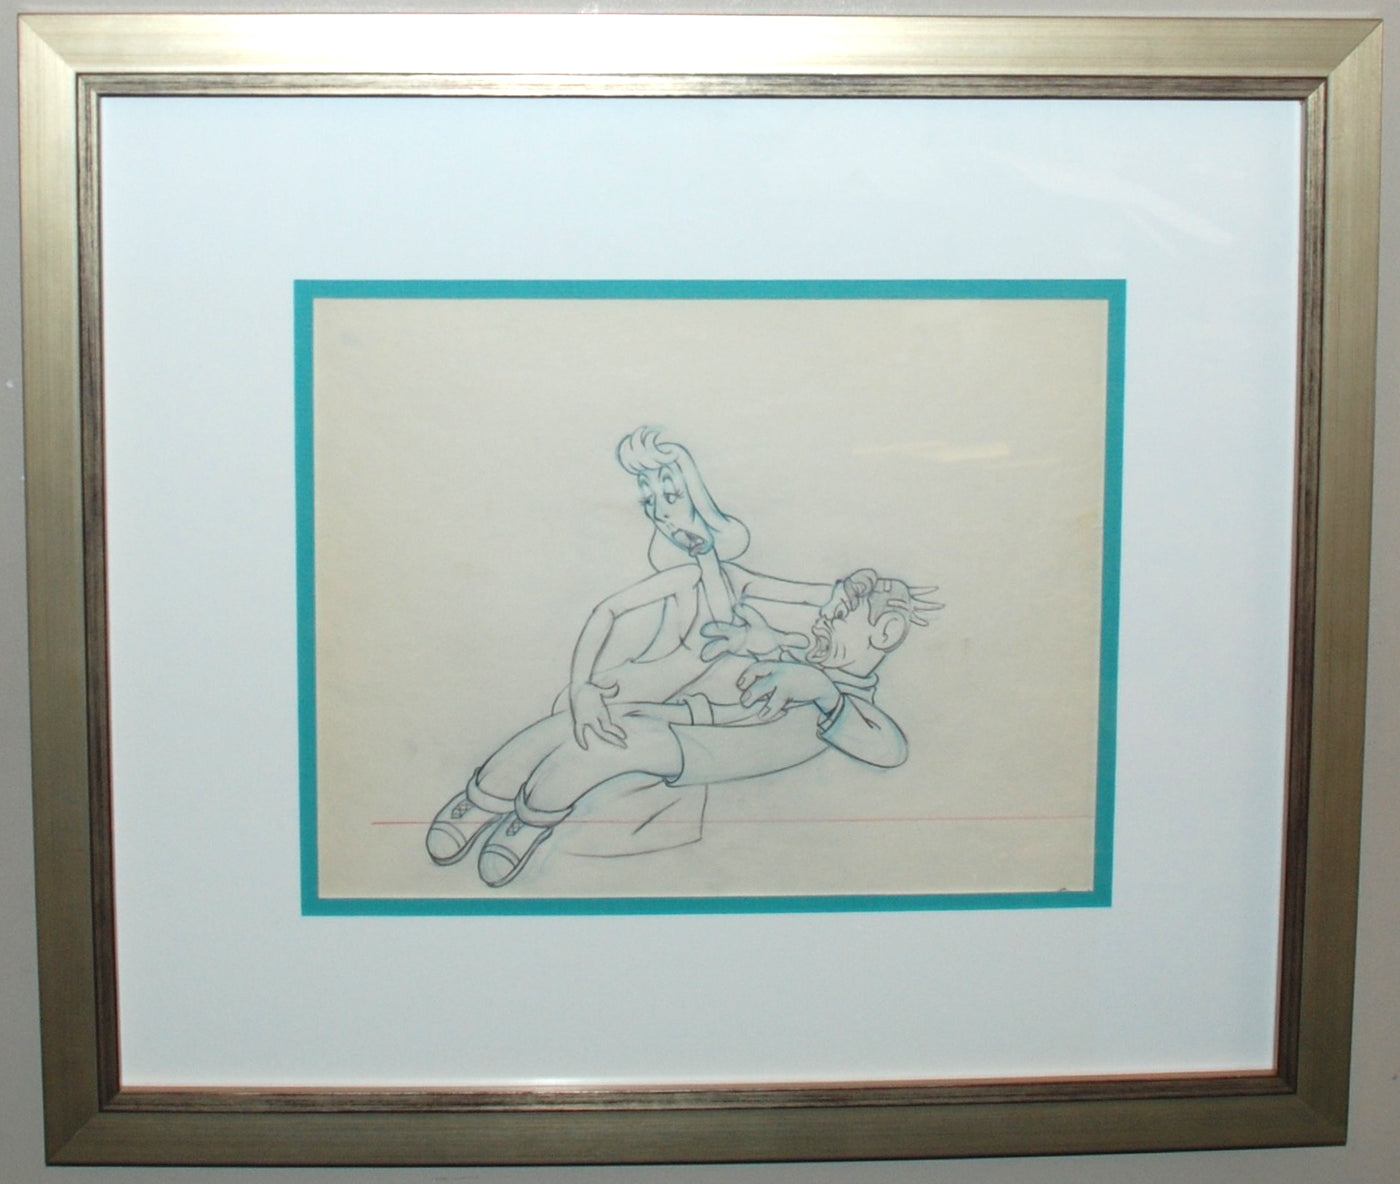 Original Walt Disney Production Drawing from Mother Goose Goes Hollywood featuring Clark Gable and Greta Garbo